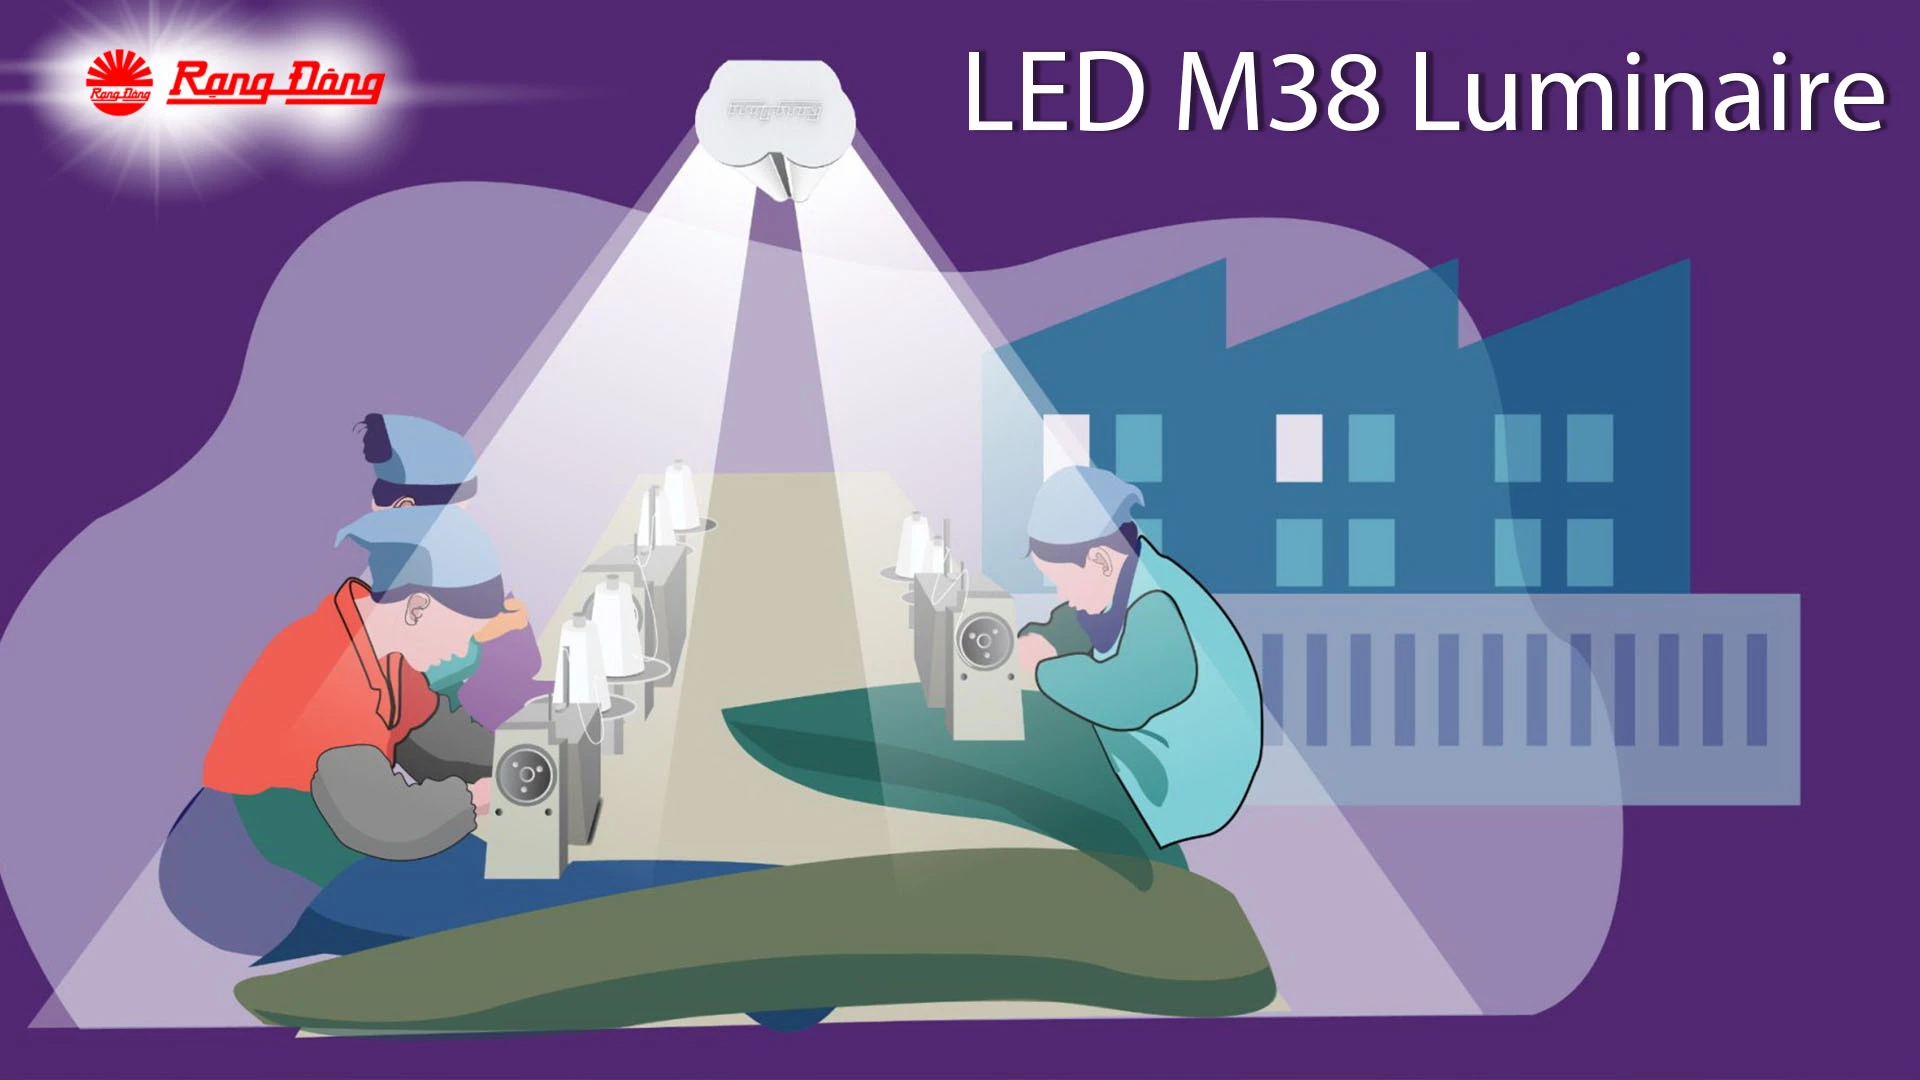 Rang Dong LED M38 luminaires - The best choice for industrial lighting